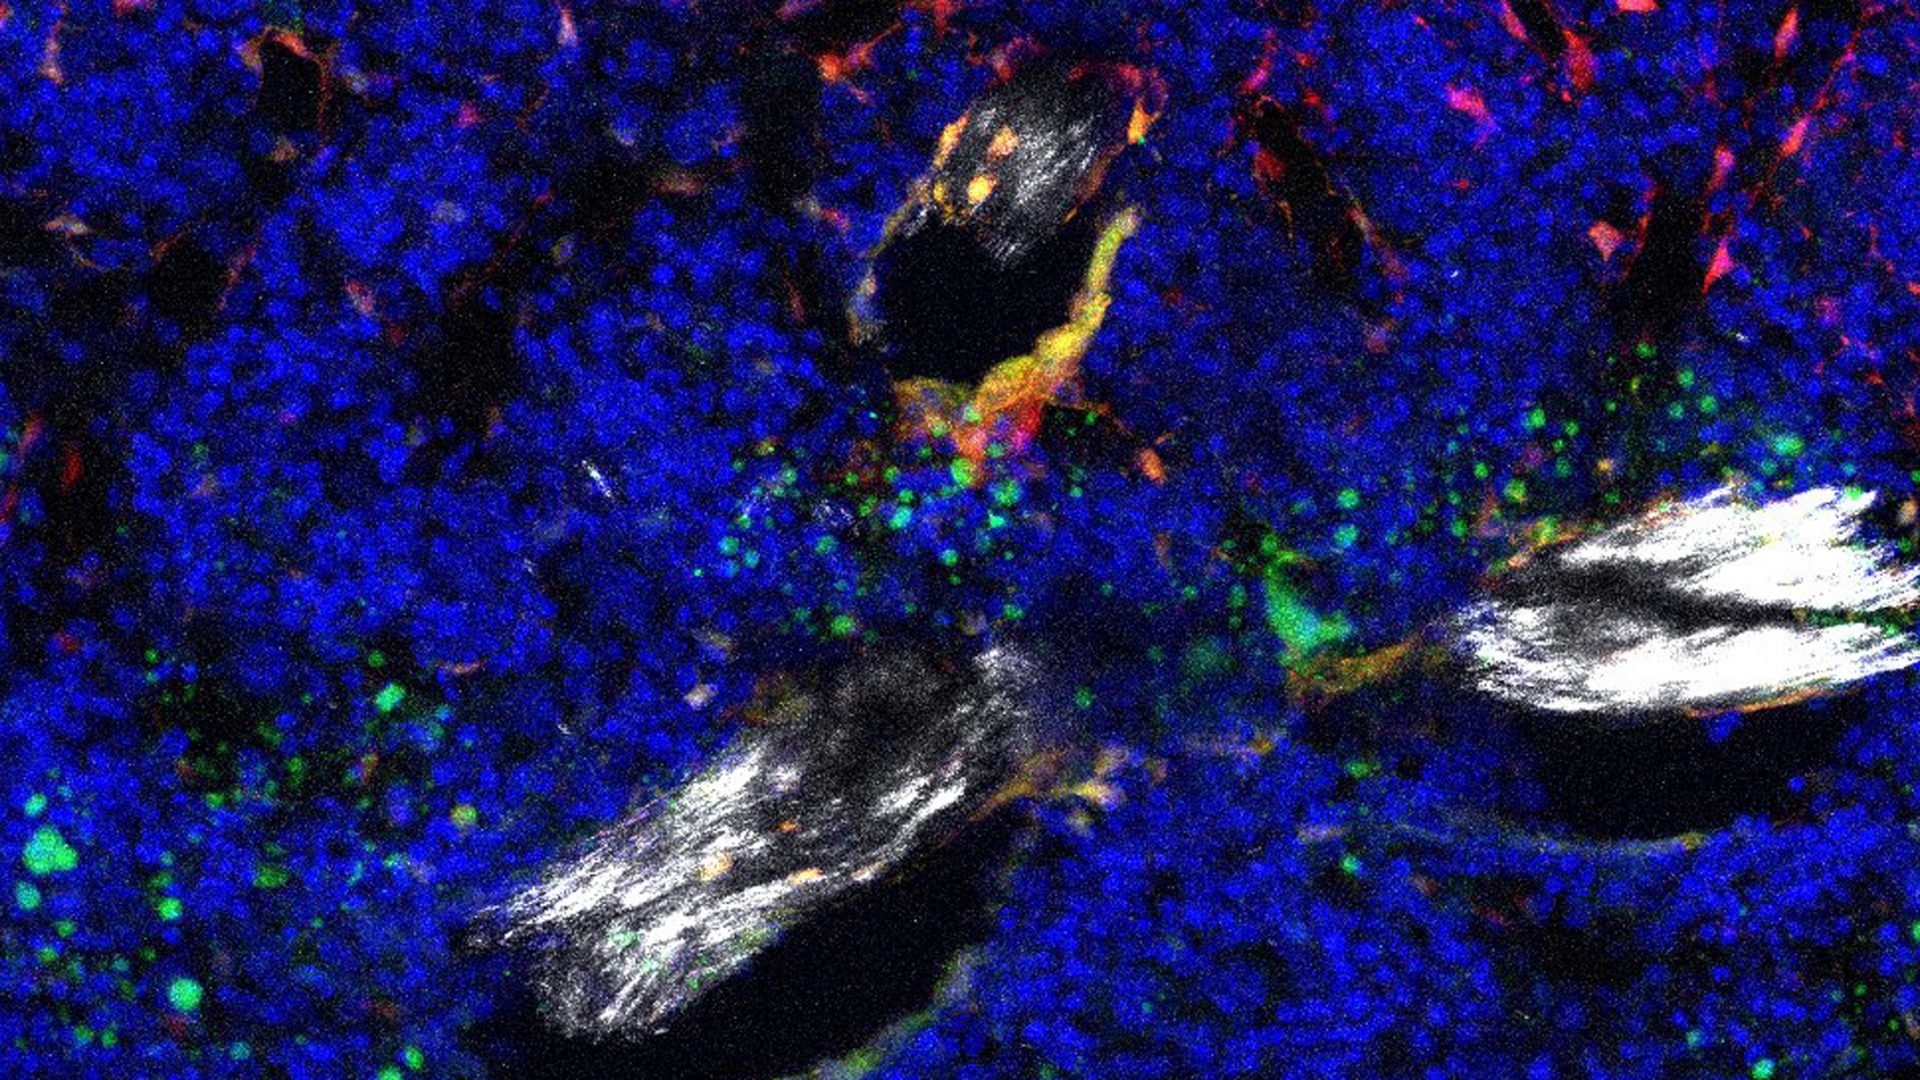 Immunofluorescence microscopy showing bone and fat precursor cells (red and green) in the aged mouse bone marrow